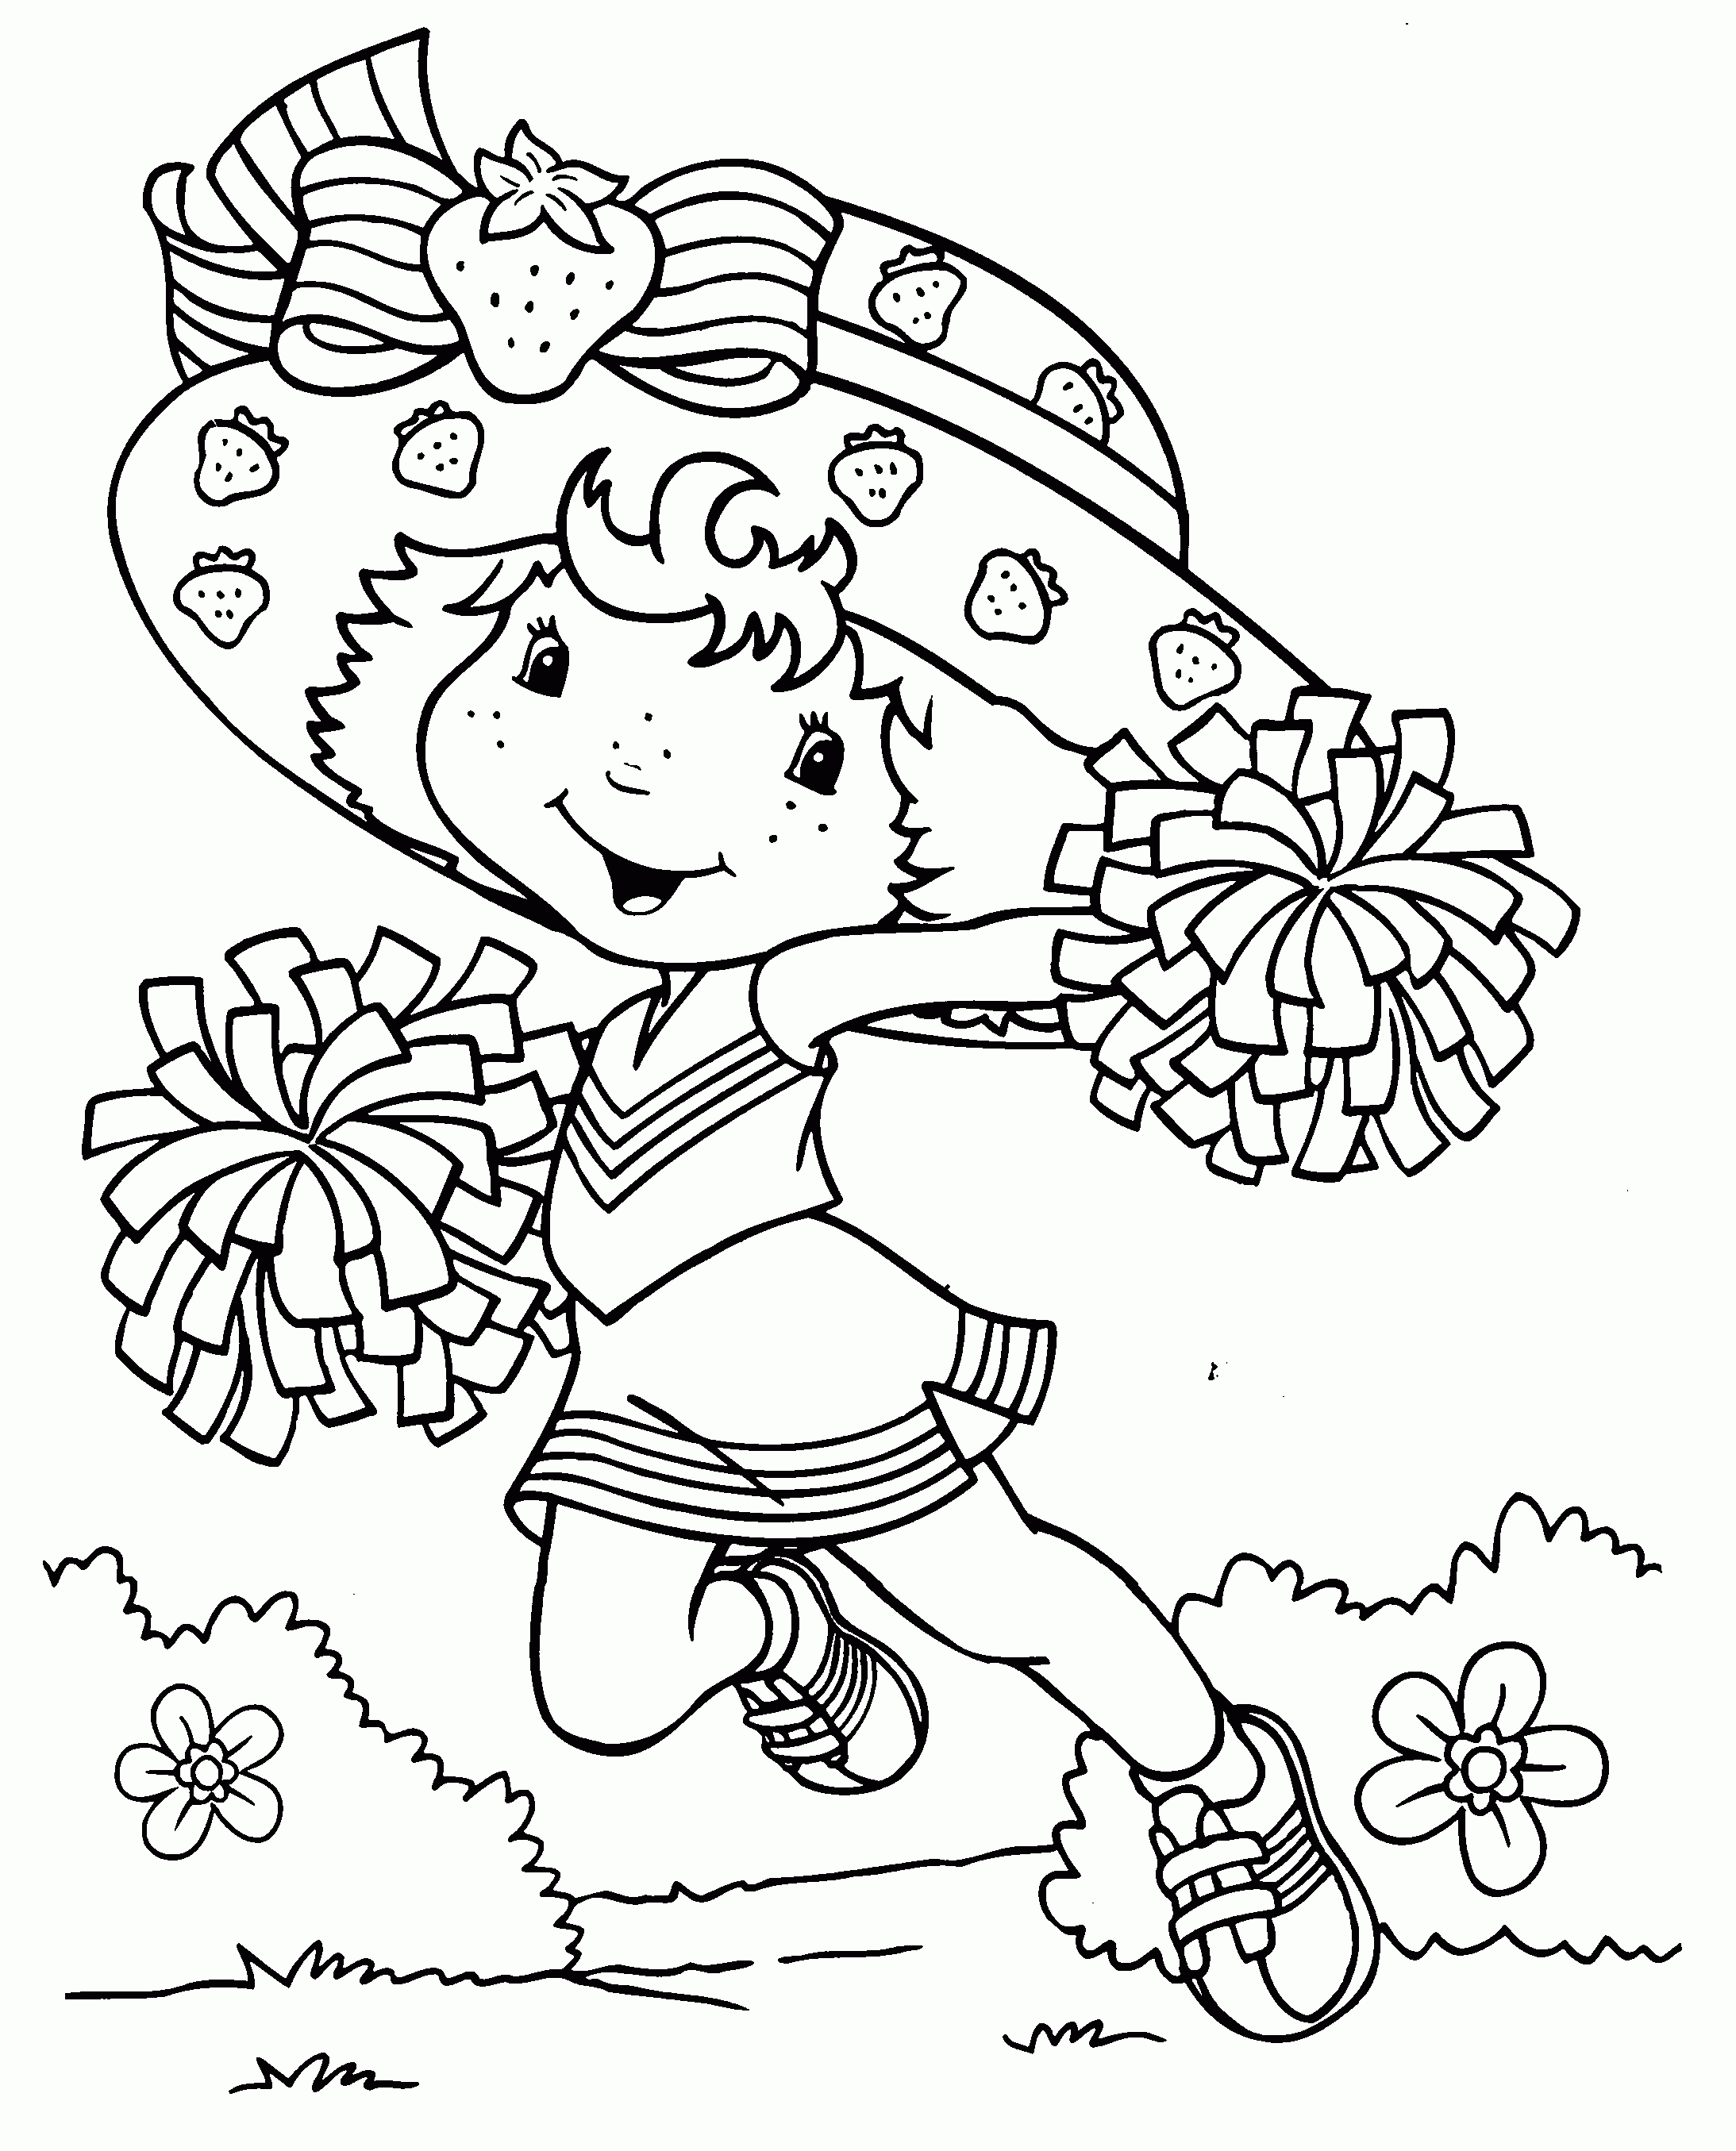 Strawberry Shortcake To Download For Free - Strawberry Shortcake - Strawberry Shortcake Coloring Pages Free Printable